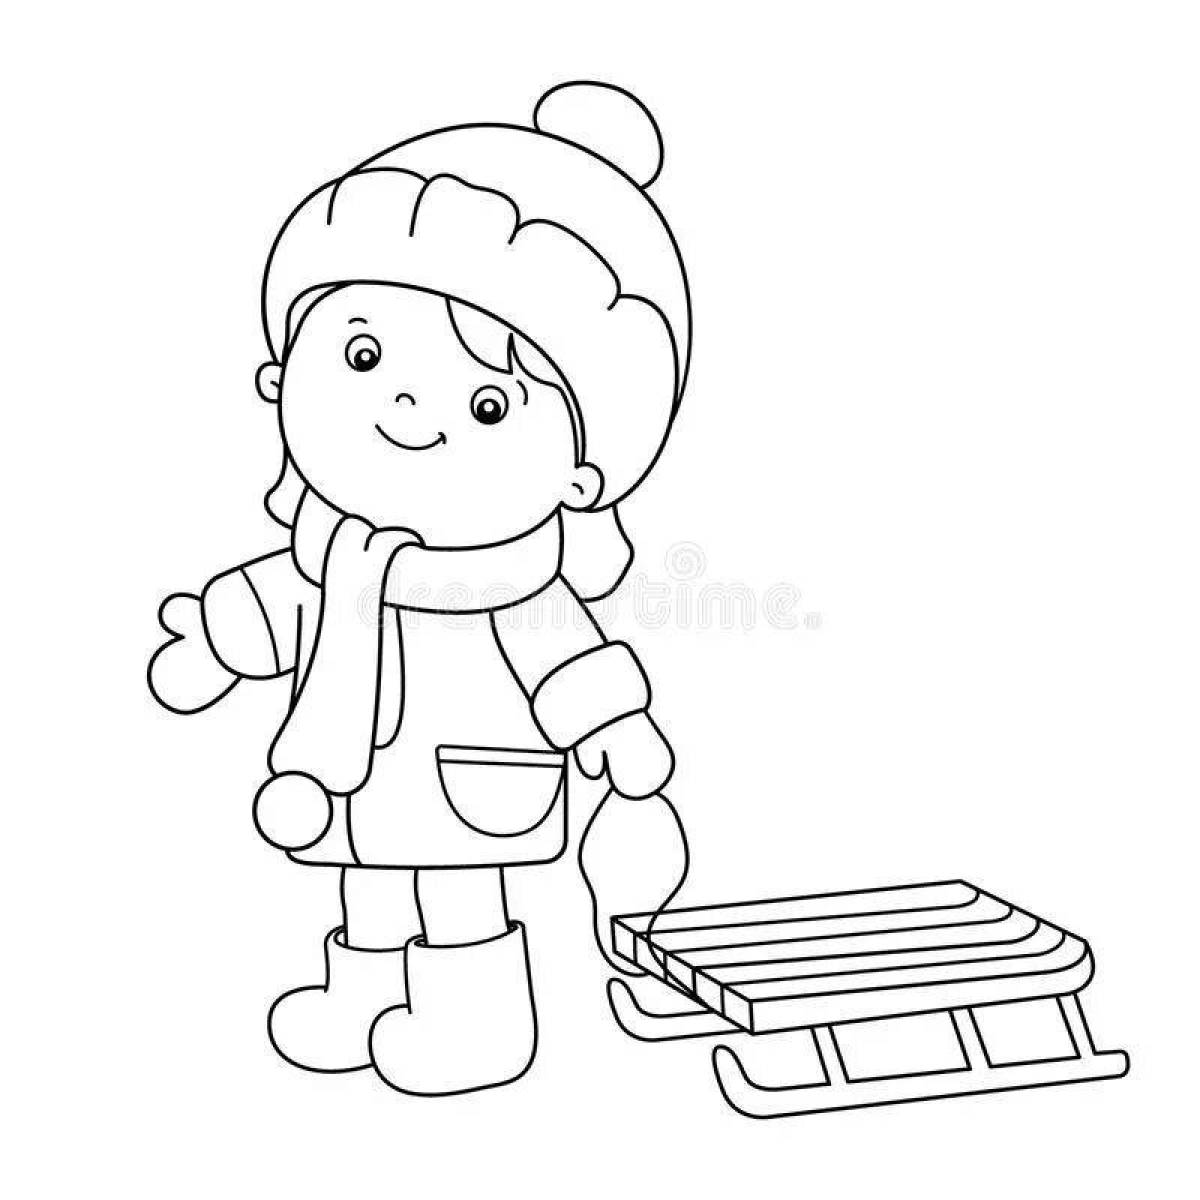 Sparkling child in winter clothes